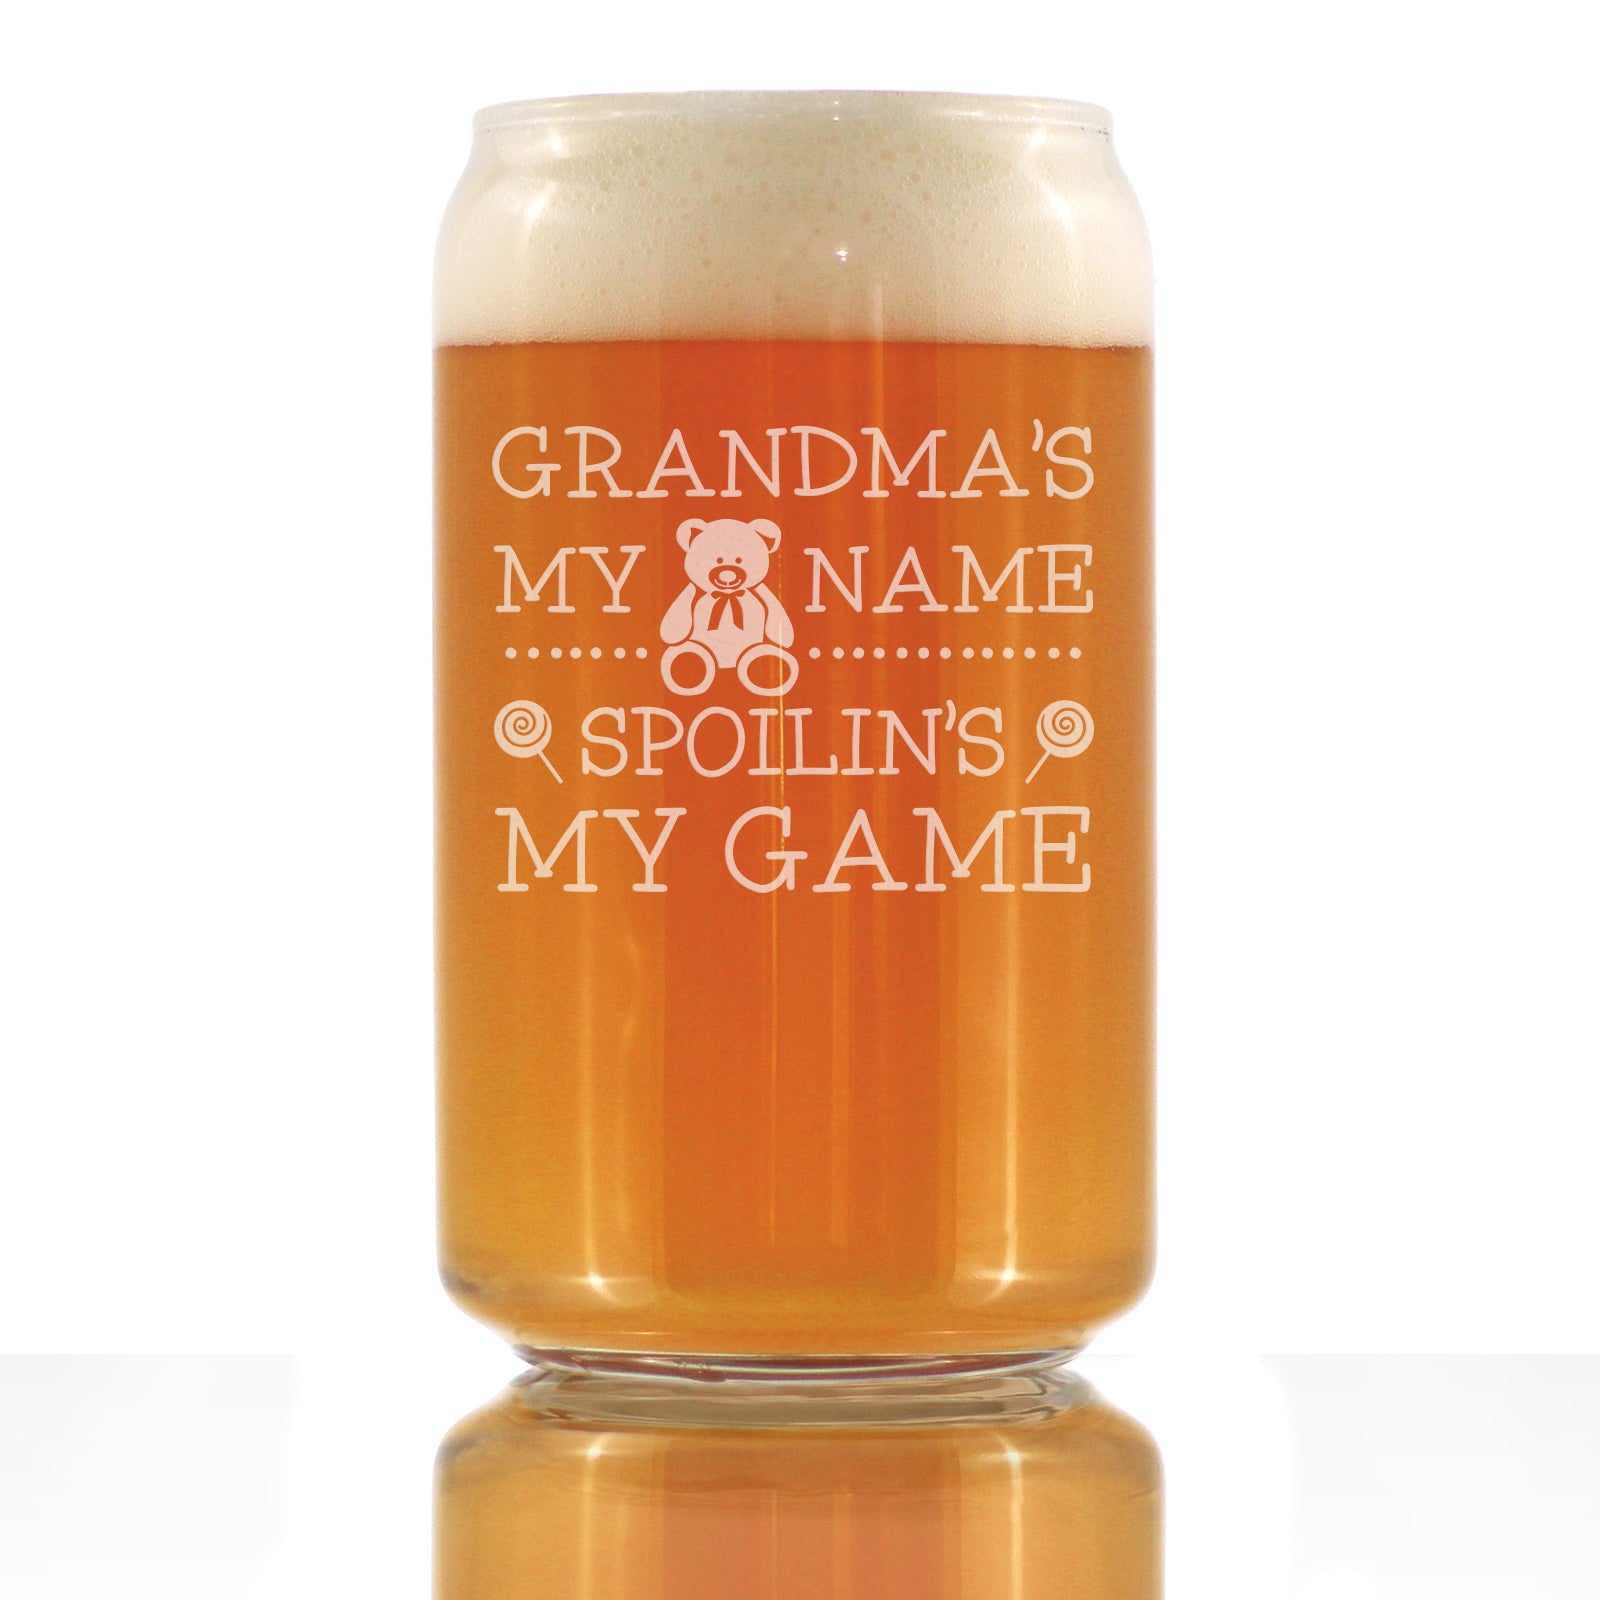 Grandma's My Name, Spoilin's My Game - Beer Can Pint Glass - Funny Gifts for Grandma - 16 Oz Glasses